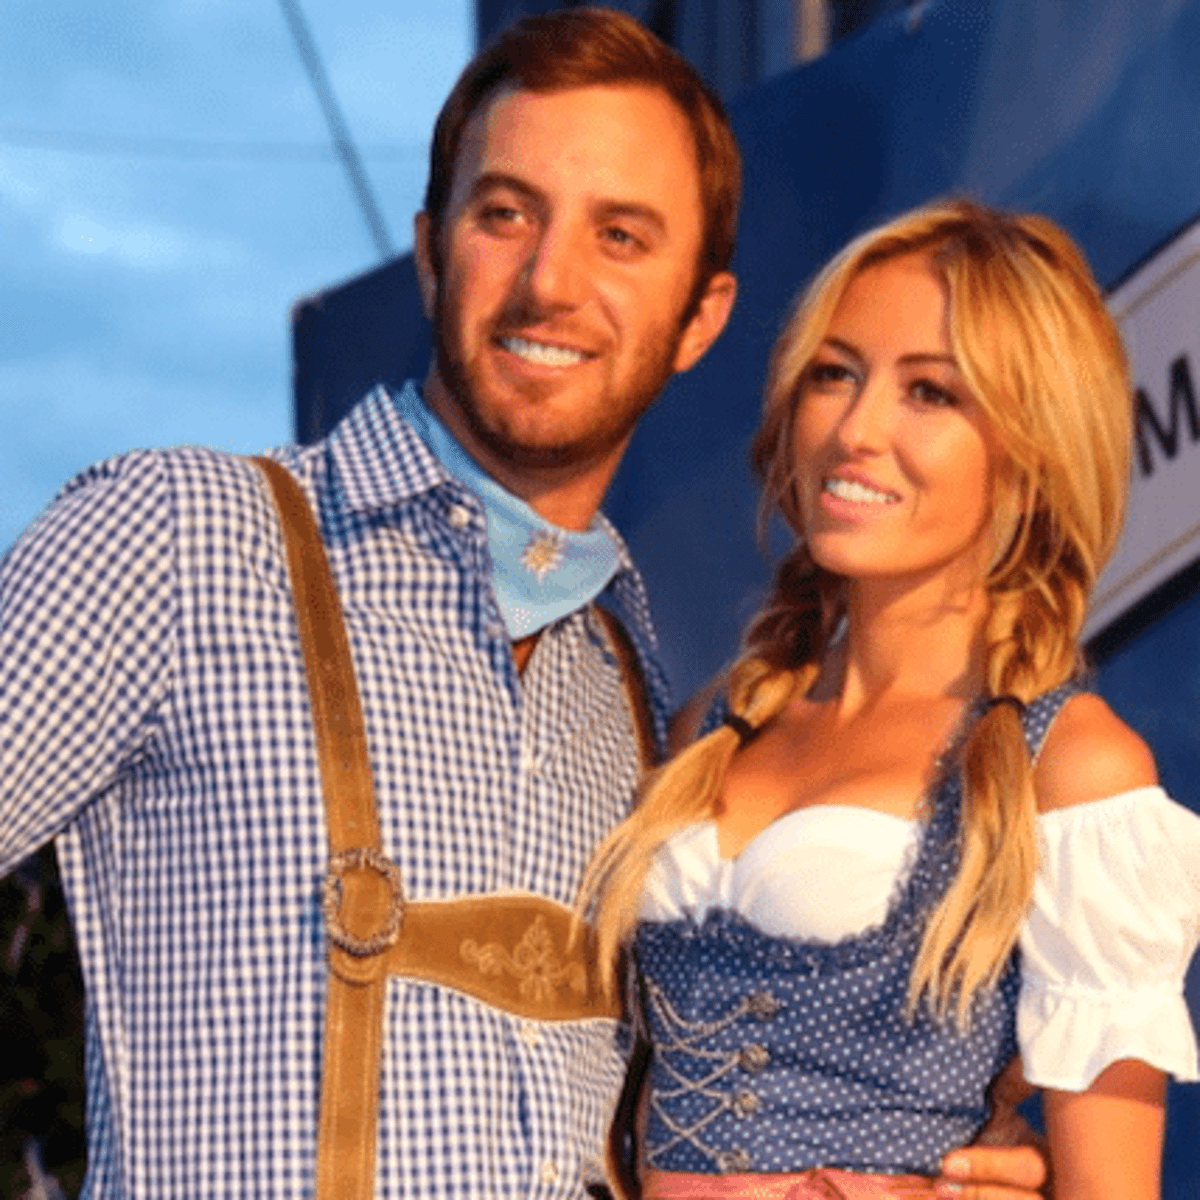 Paulina Gretzky: The Great One's Daughter + LIV Golf's First Lady